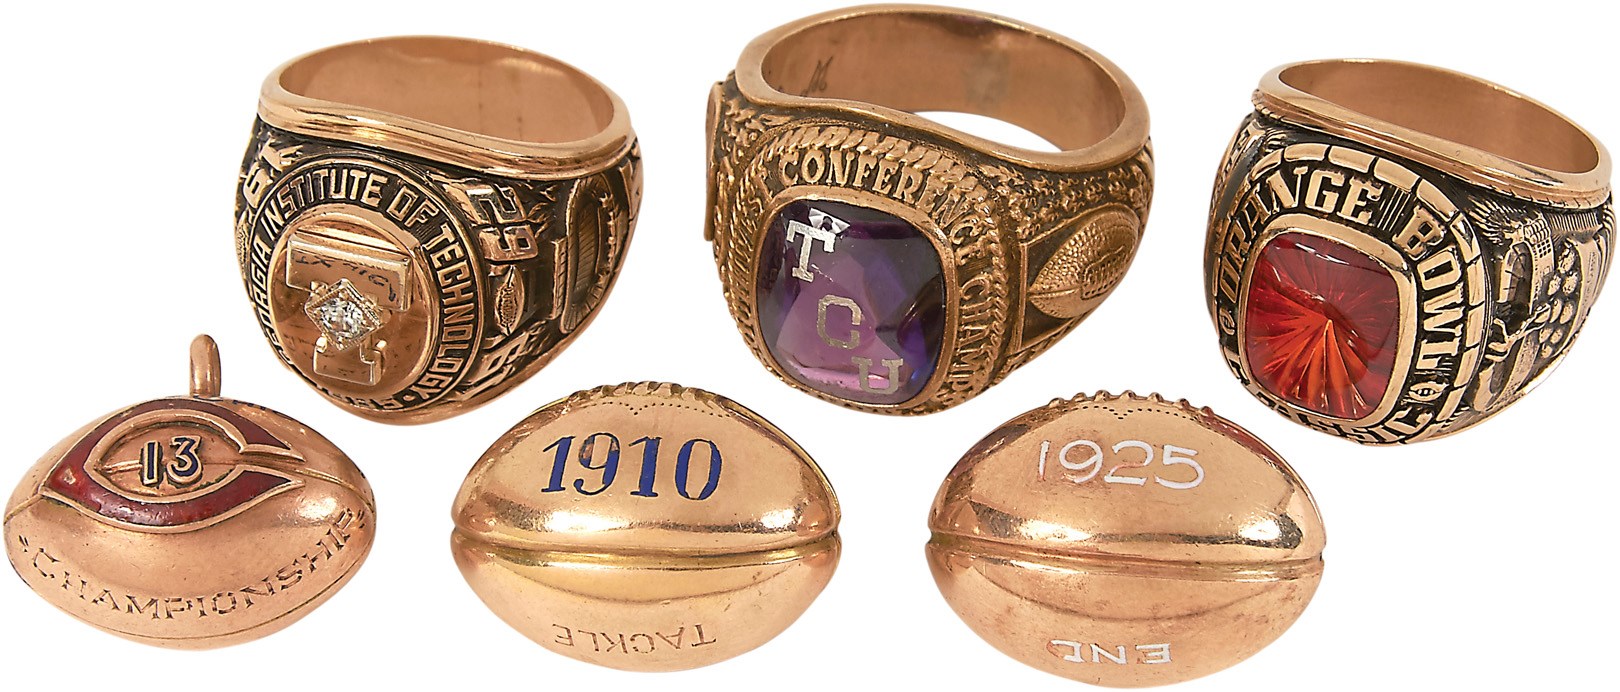 1910-80s College Football Bowl and Championship Rings & Pendants (6)